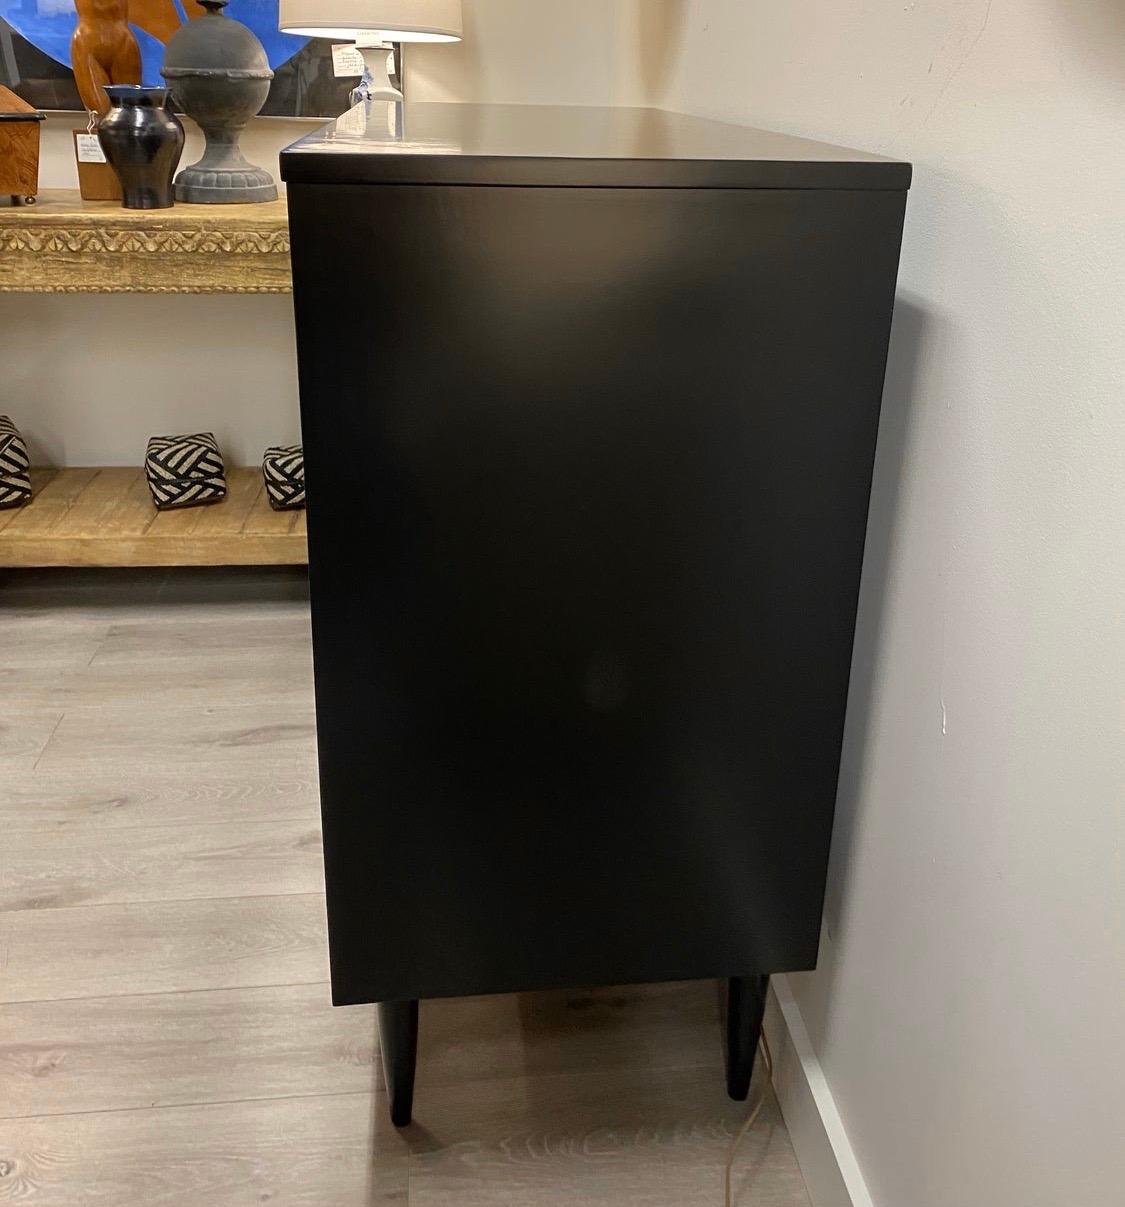 Newly lacquered in a flat black color, Dixie dresser with multiple drawers for all your storage needs.
The black lacquer breathes new life into this iconic beauty. Great scale and better lines.